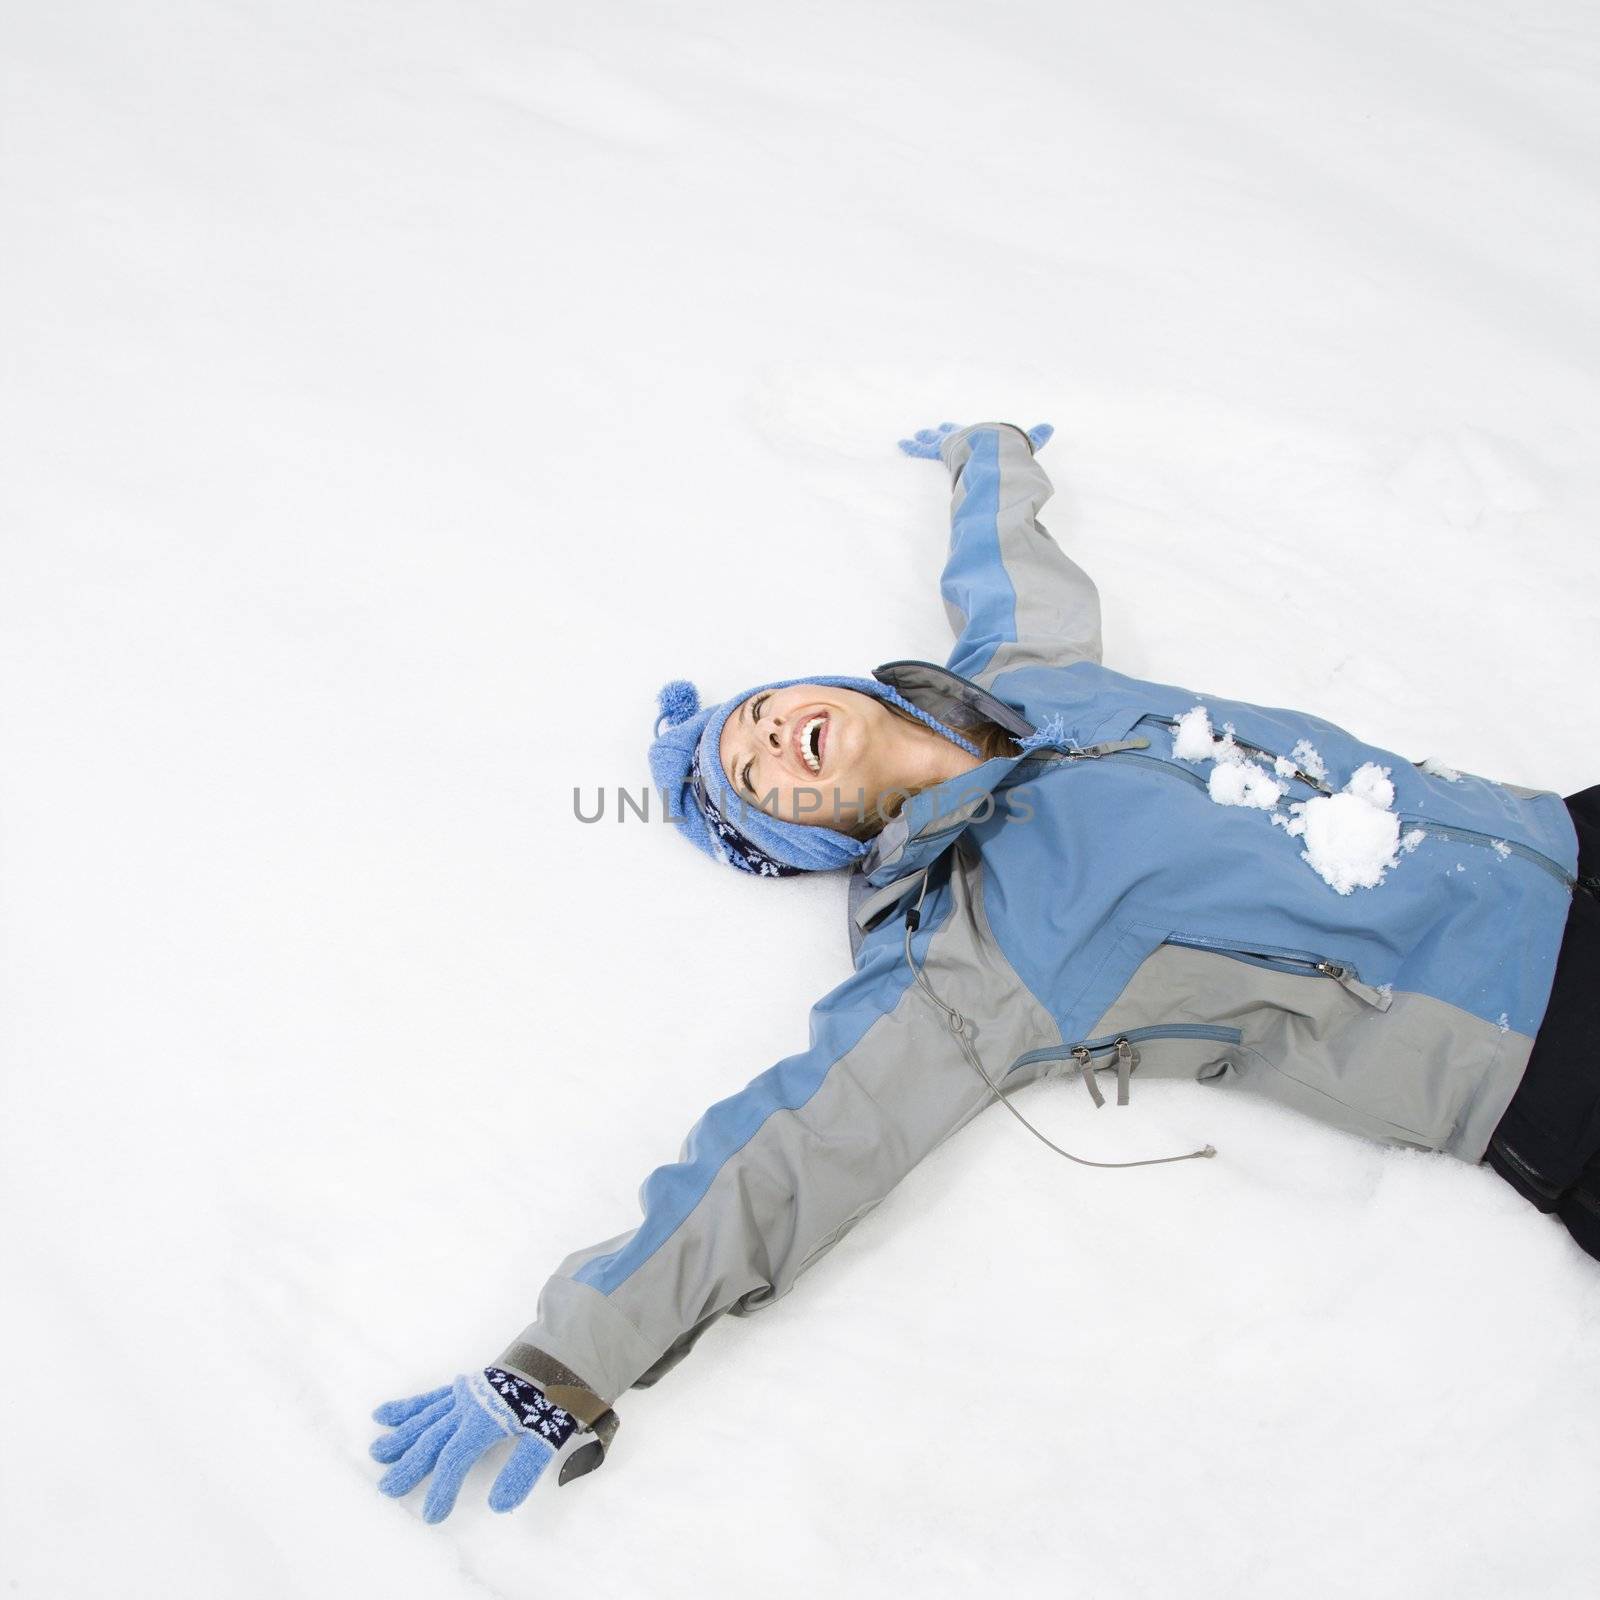 Attractive laughing mid adult Caucasian woman wearing blue ski clothing lying in snow making snow angel.